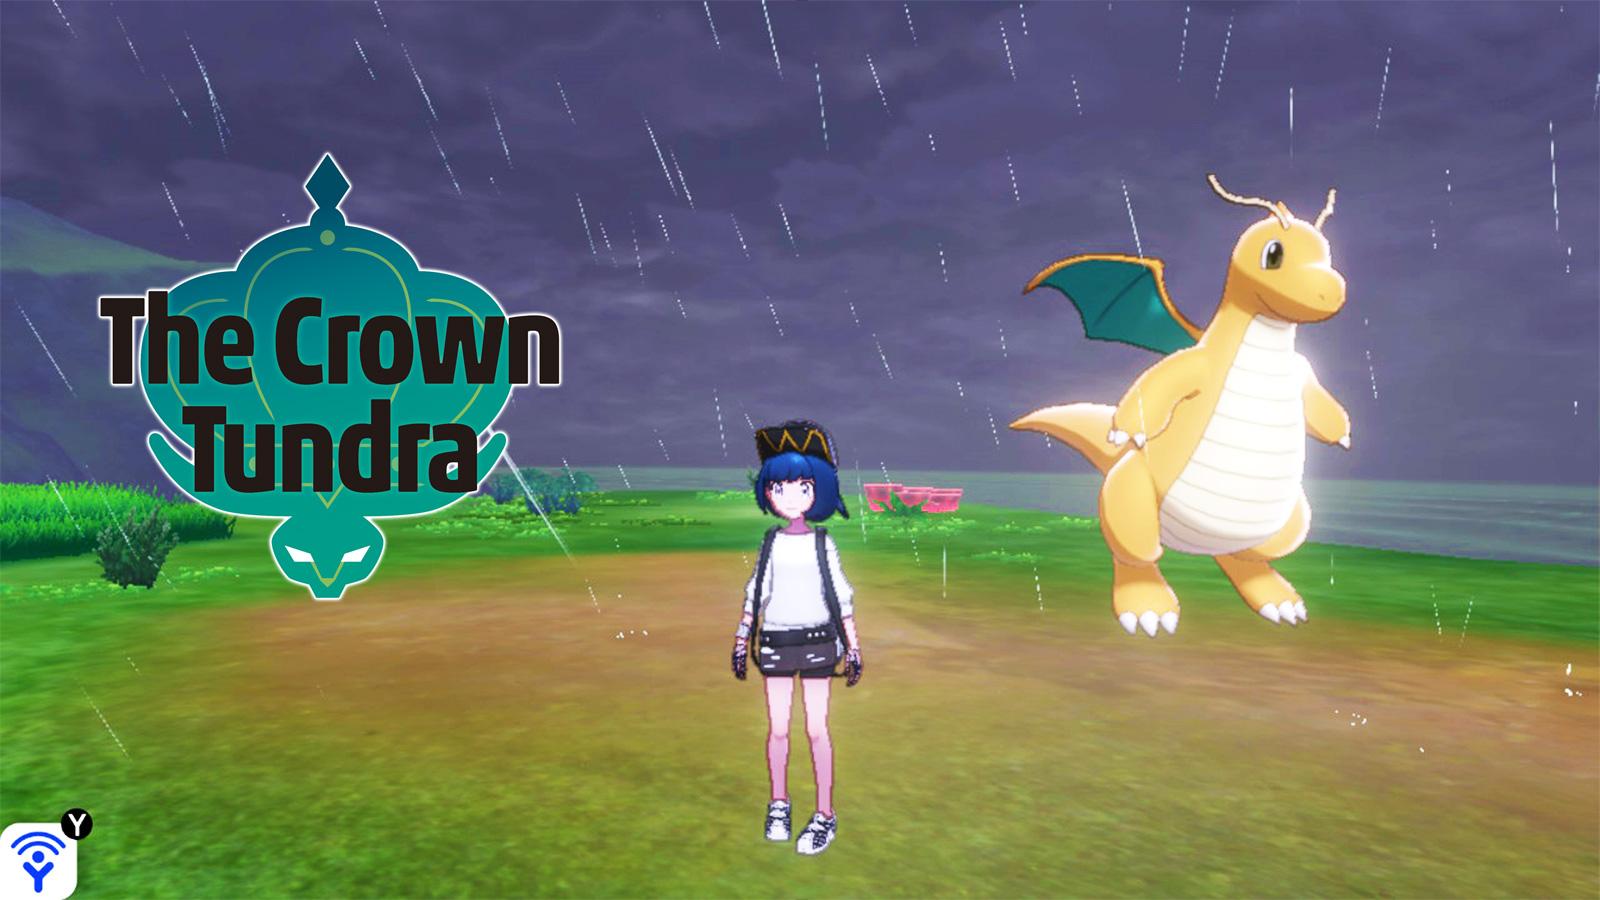 What time does Pokémon Sword and Shield's The Crown Tundra